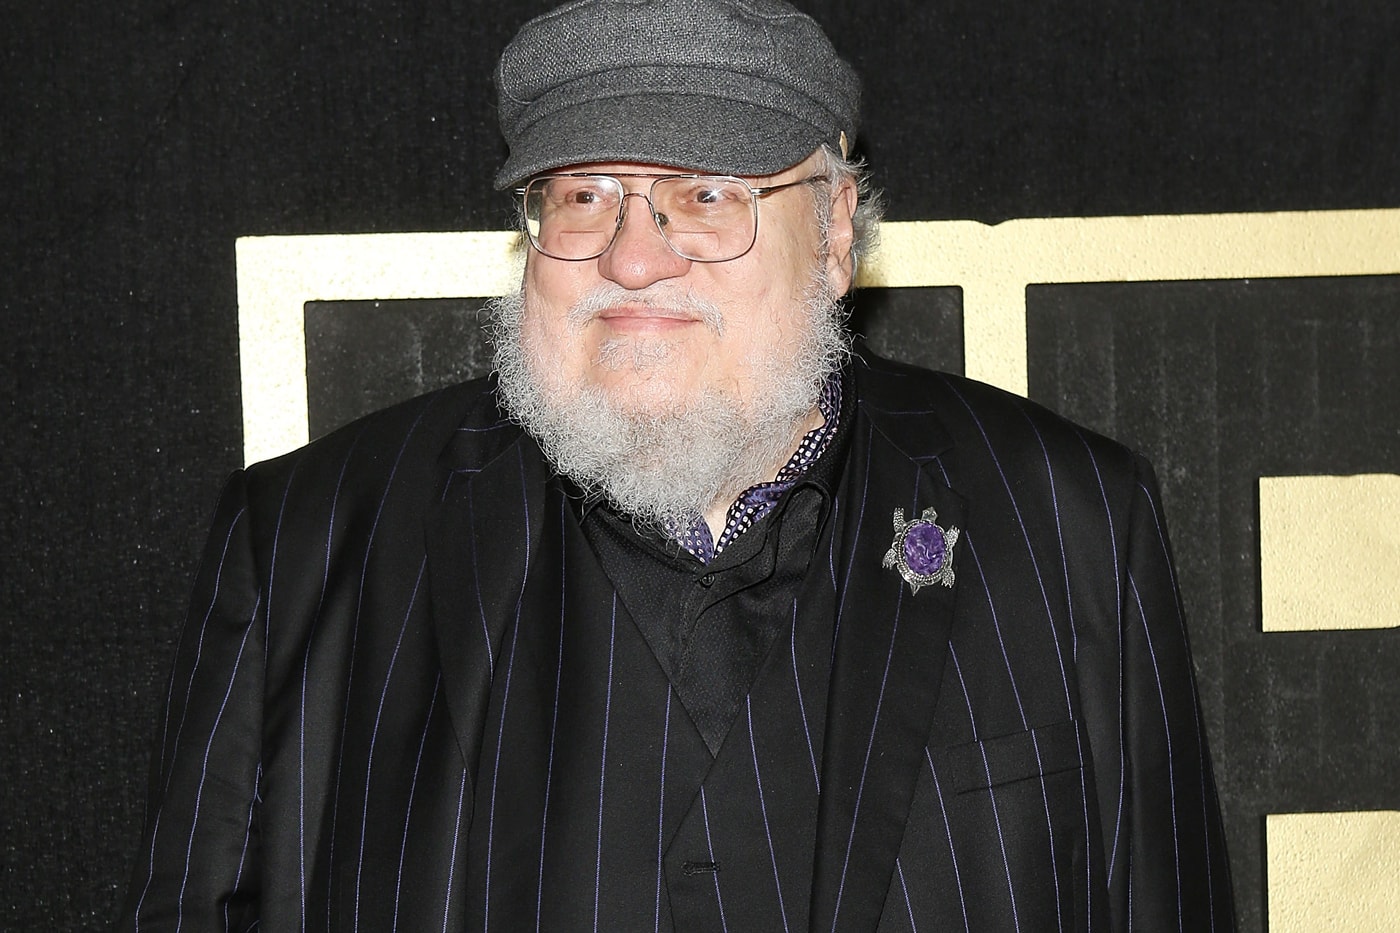 George R. R. Martin Confirms Three Game of Thrones HBO Spinoffs  got a song of ice and fire